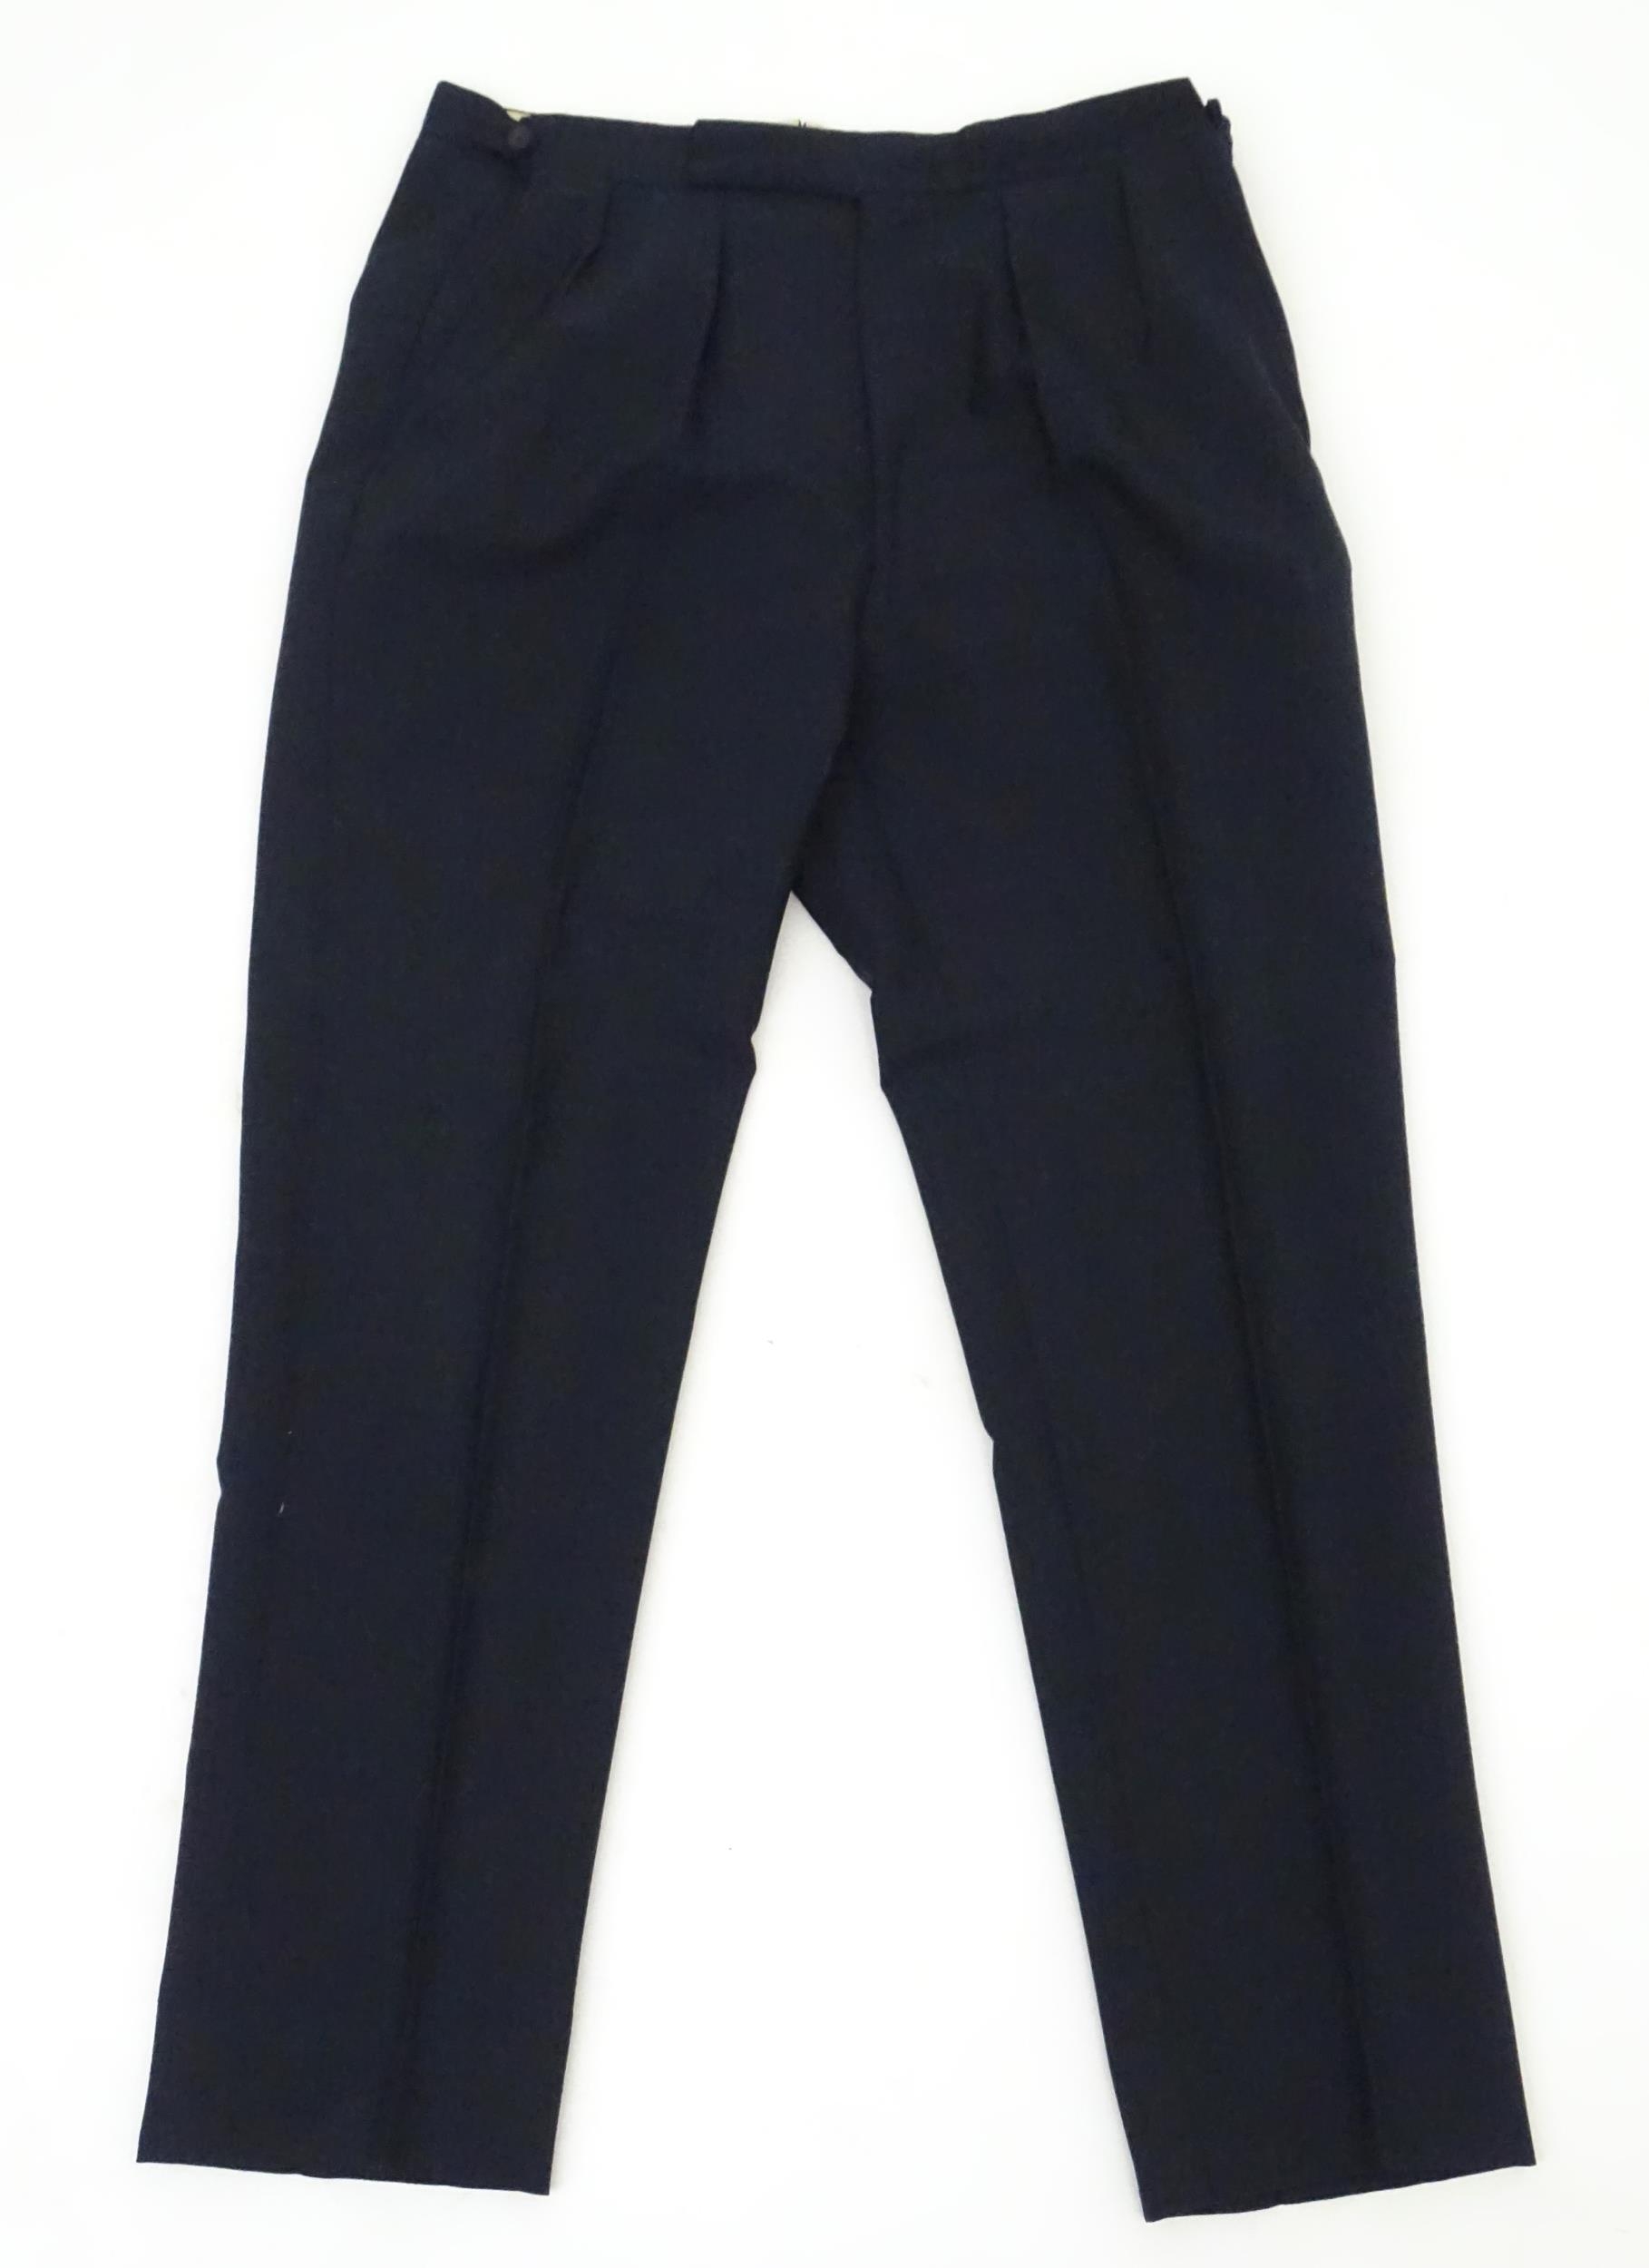 A navy blue bespoke suit with tapered trousers and metal button detail by 'Sam's Tailor' based in - Image 2 of 17